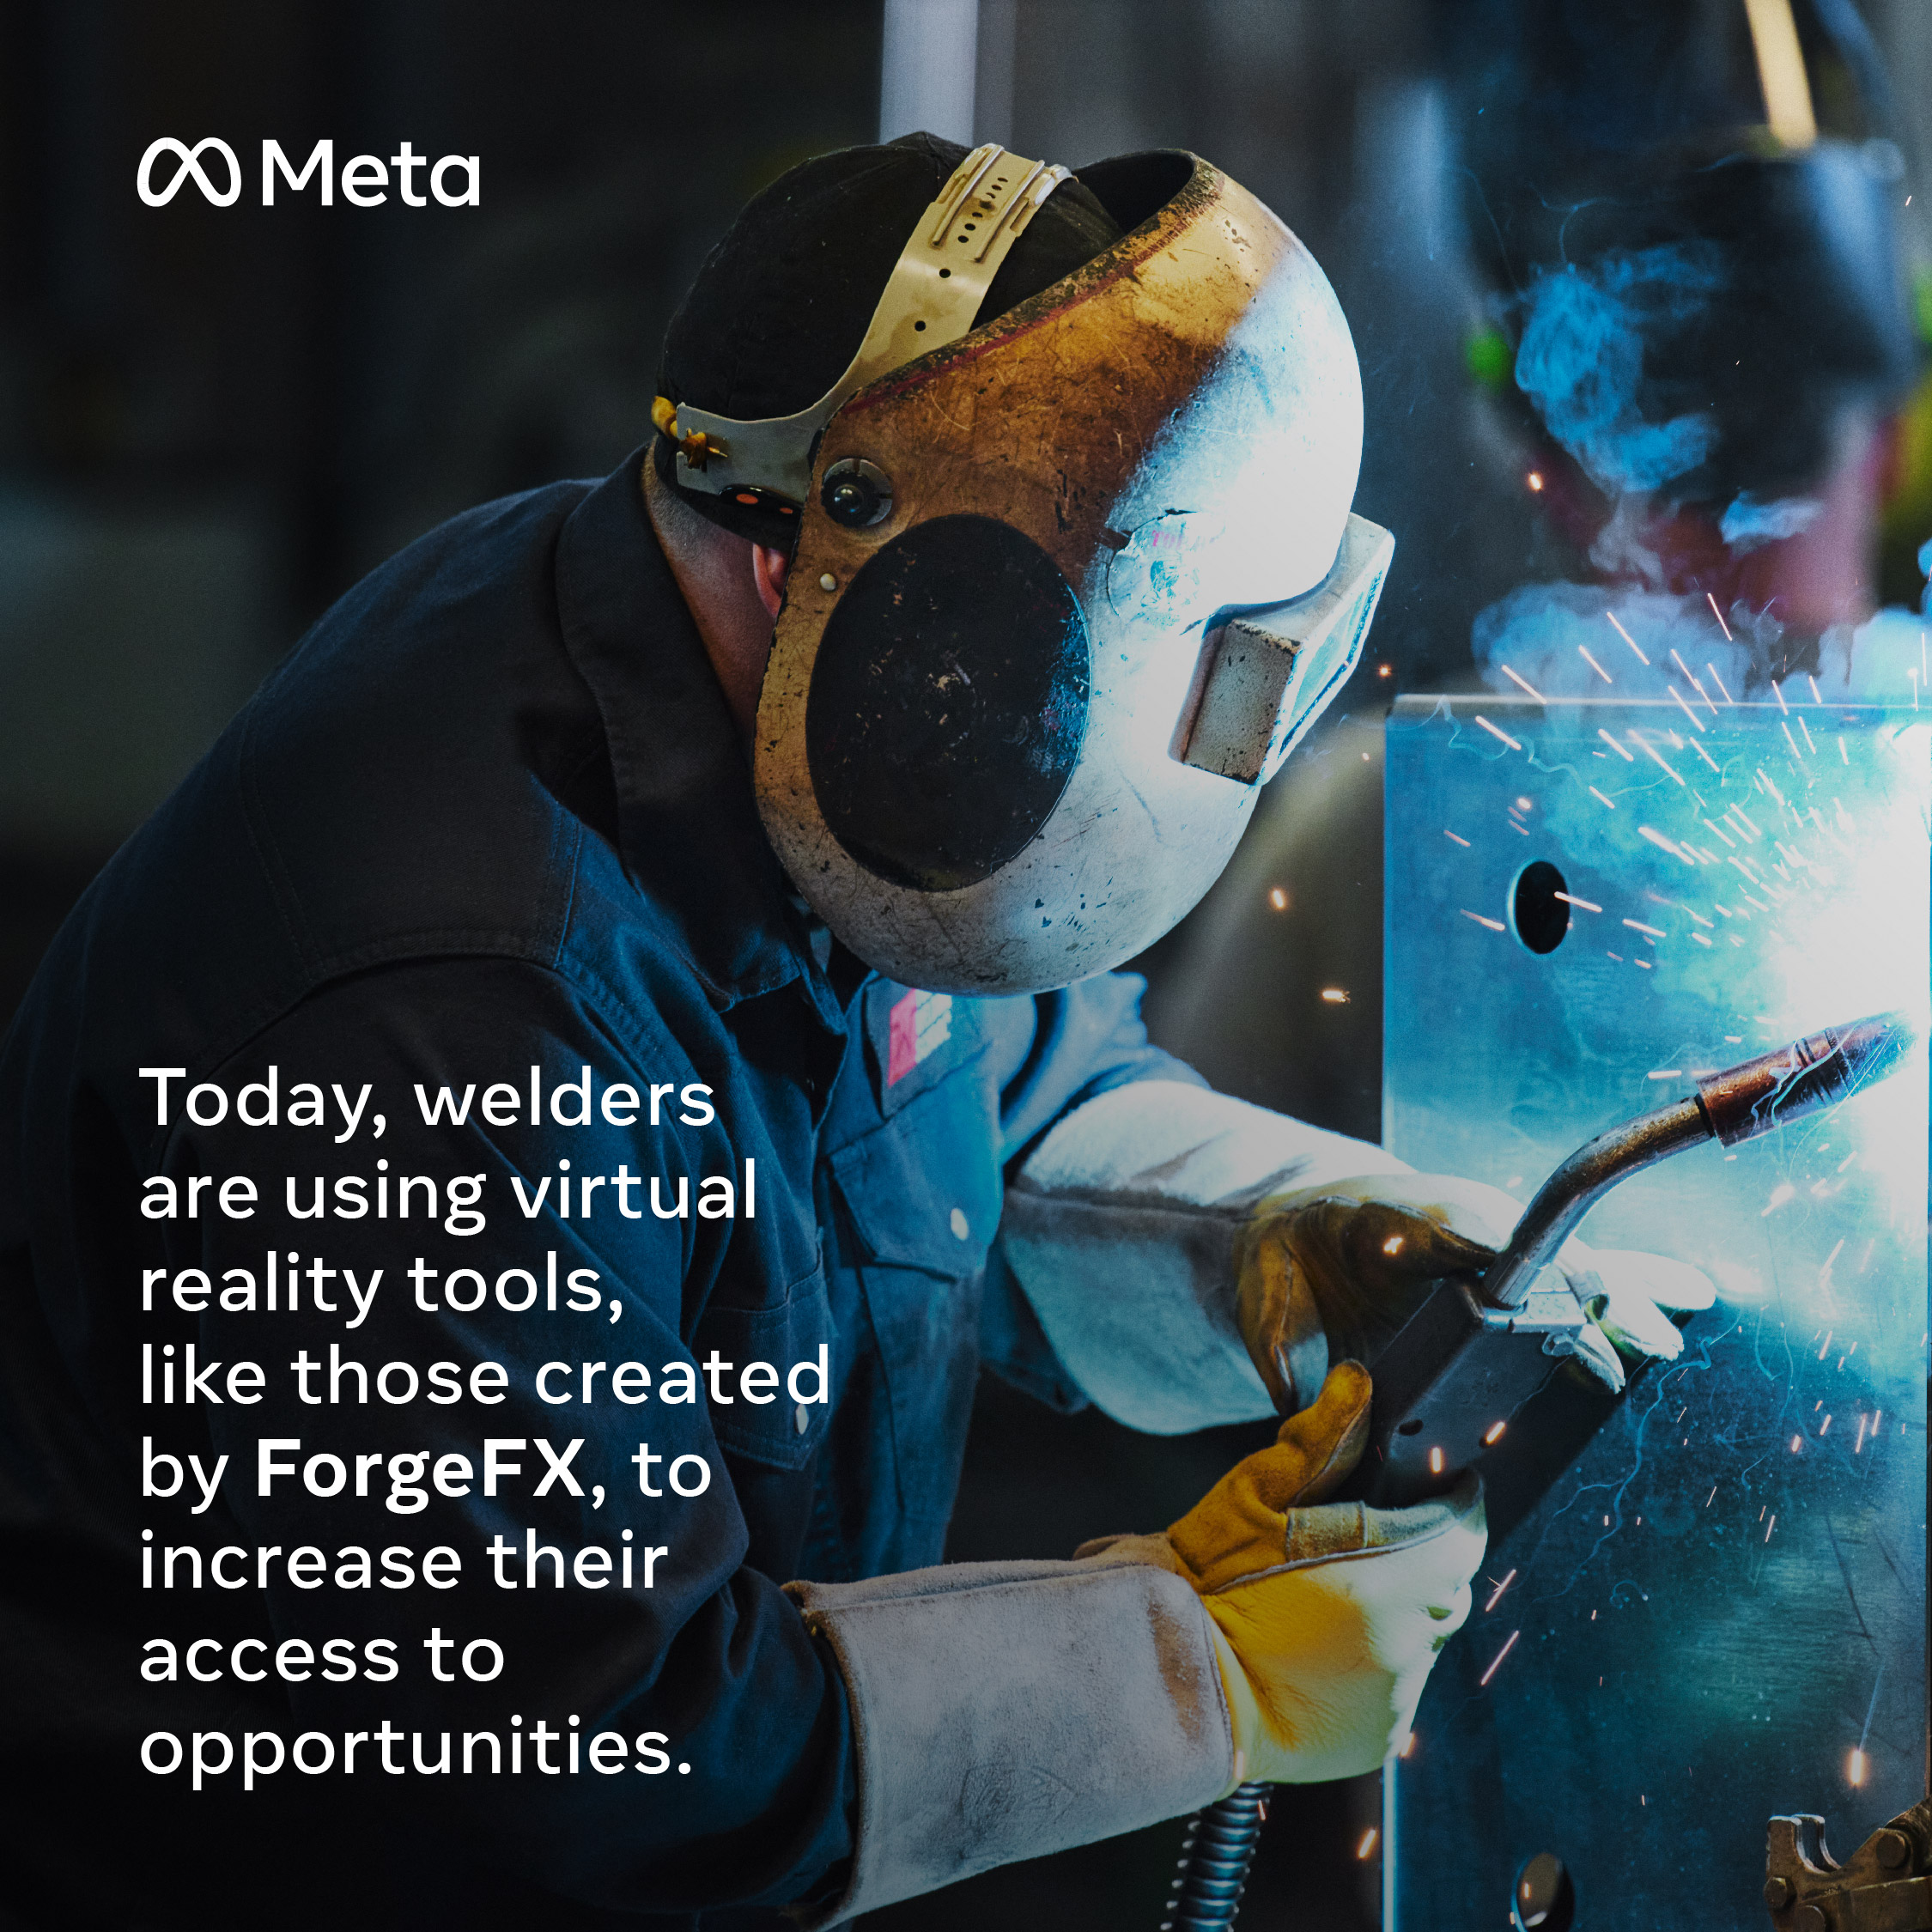 Today, welders are using virtual reality tools, like those created by ForgeFX, to increase their access to opportunities.